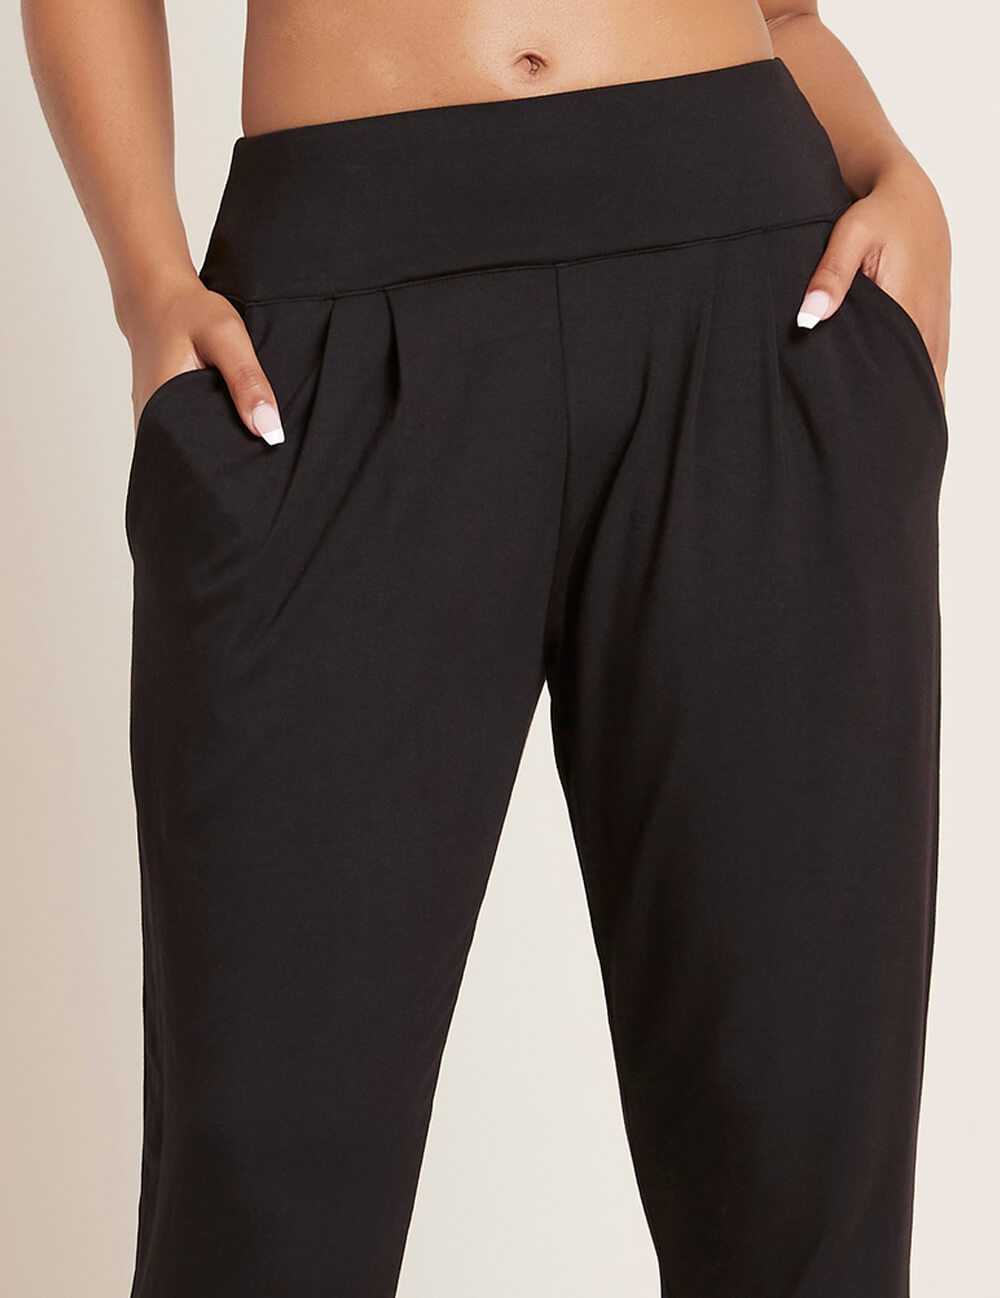 Boody Women's Downtime Lounge Pants in Black Detail